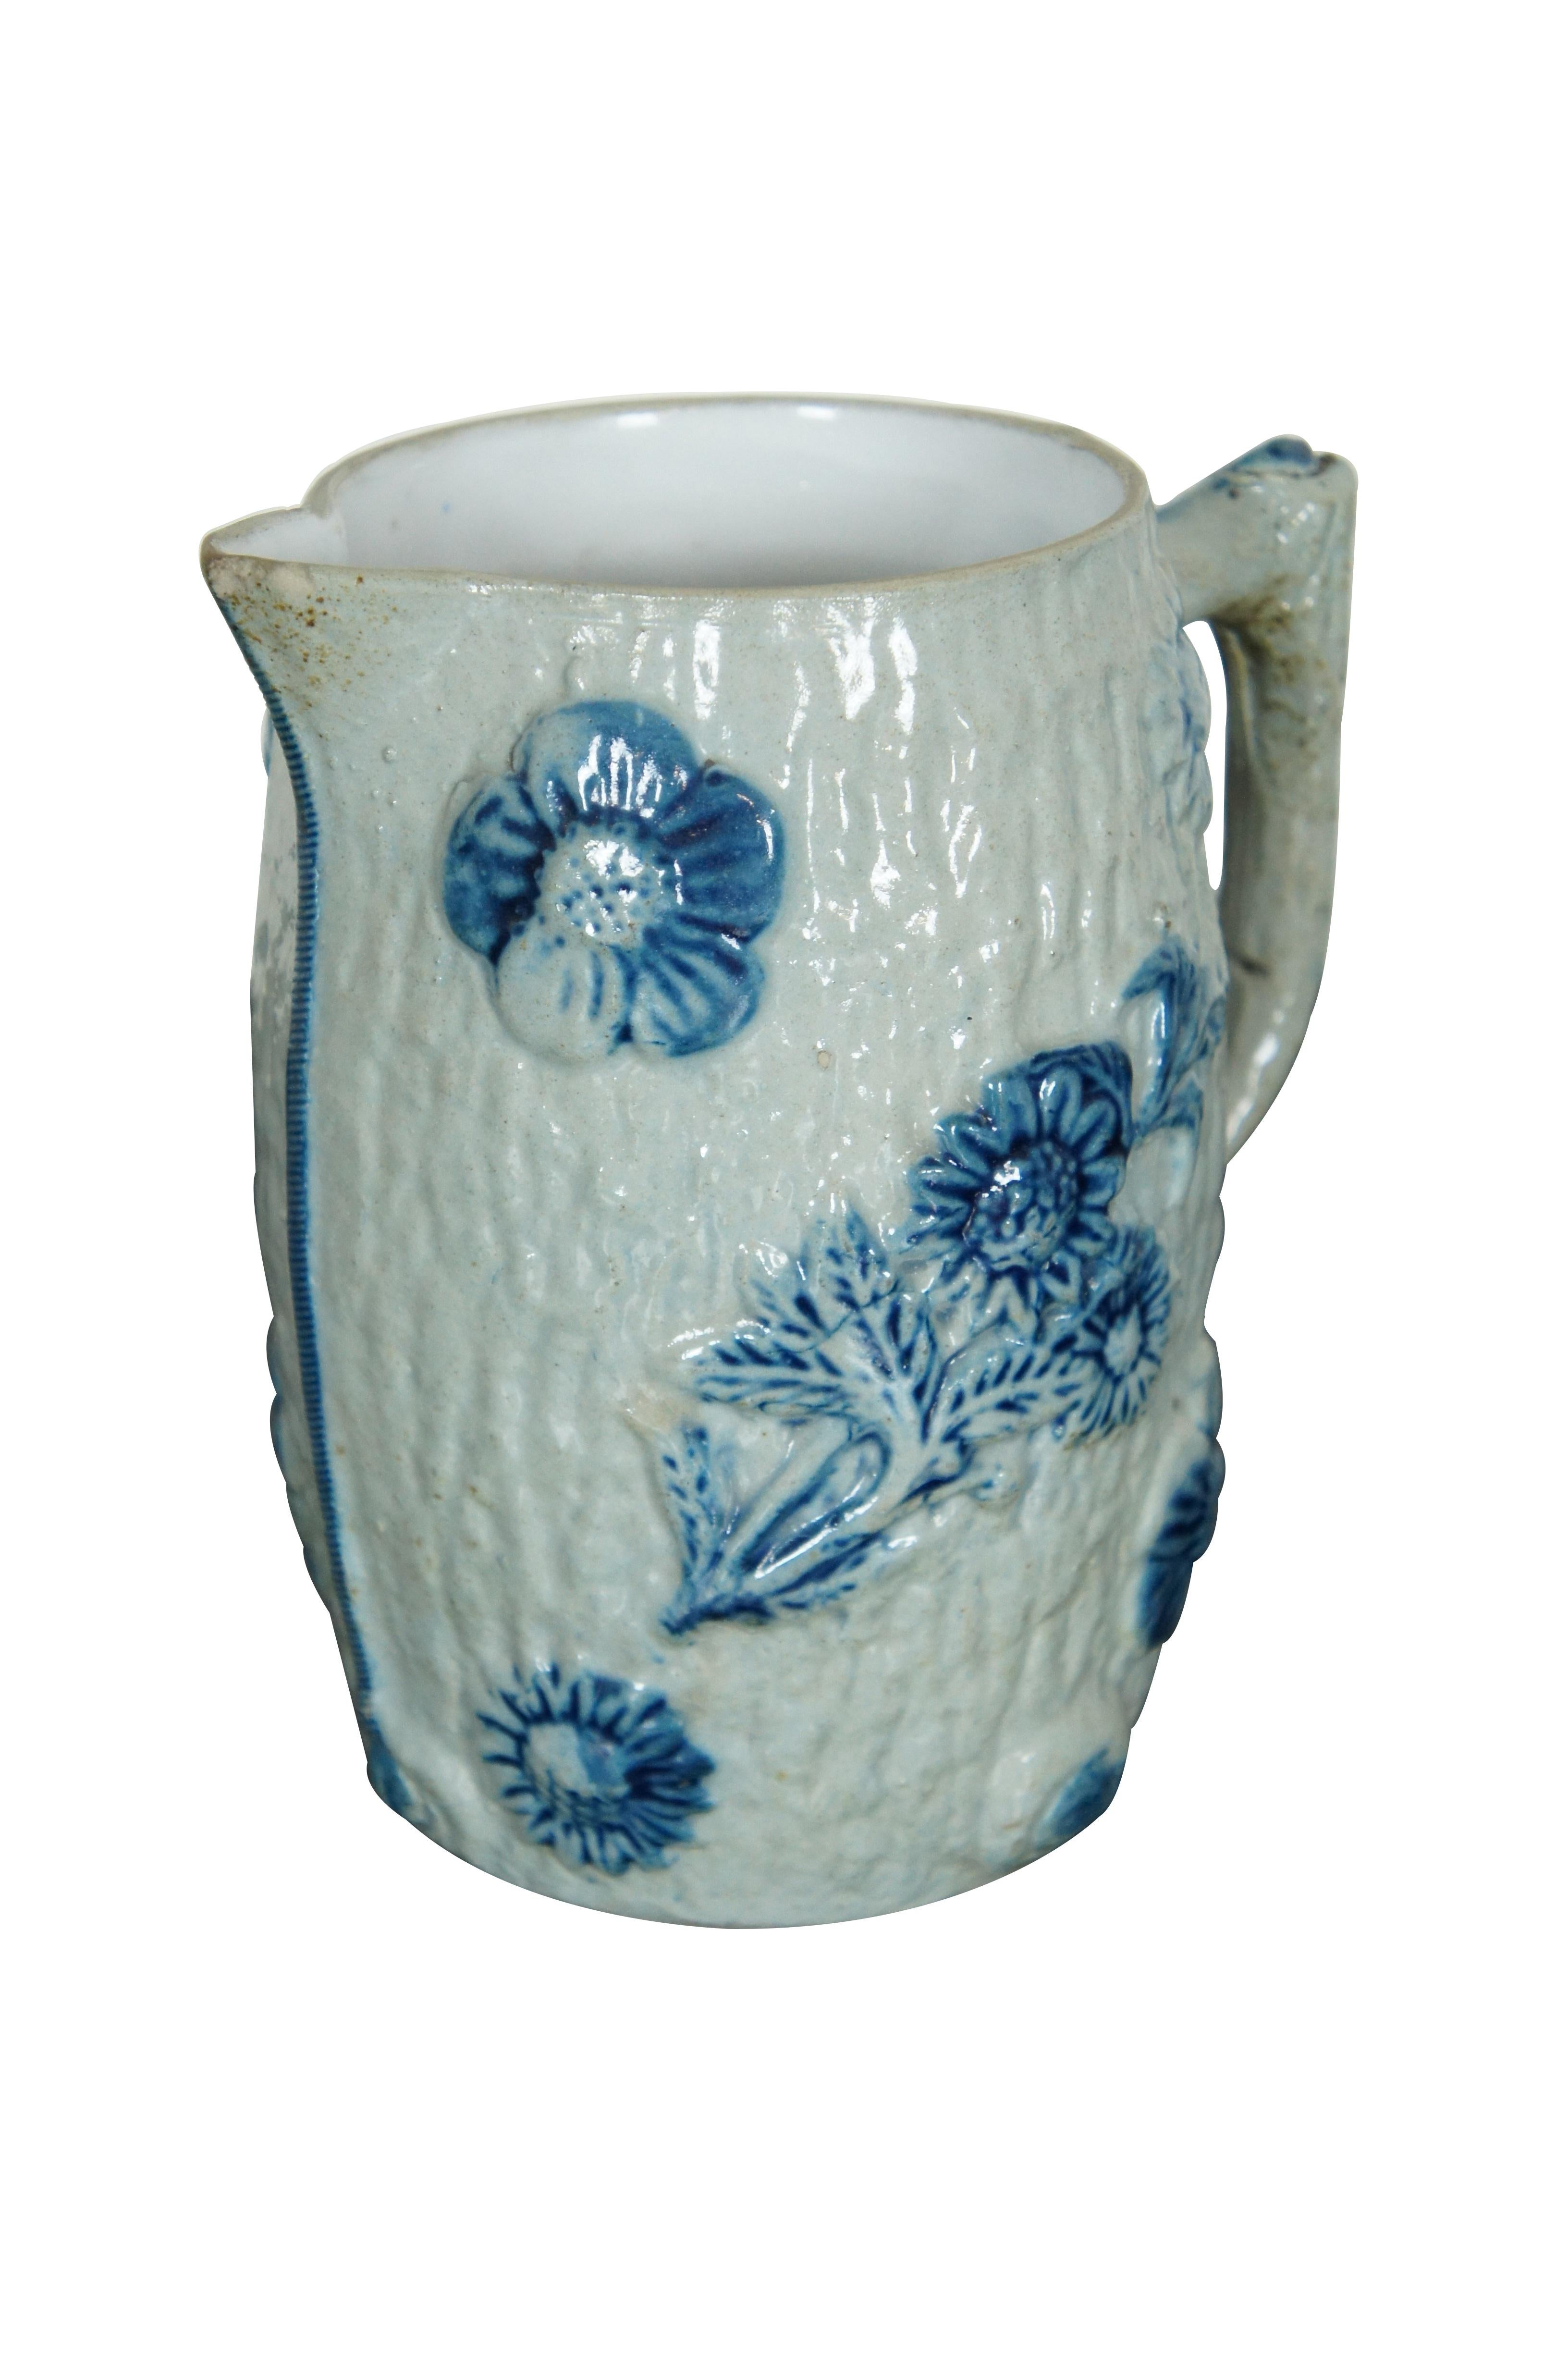 Flemish Whites of Utica, New York, circa 1890s salt glaze stoneware pitcher.  Features a white tree bark design with raised blue sunflowers and what a appears to be pine branches.

Whites of Utica
Utica, New York State. United States.

Hersteller /